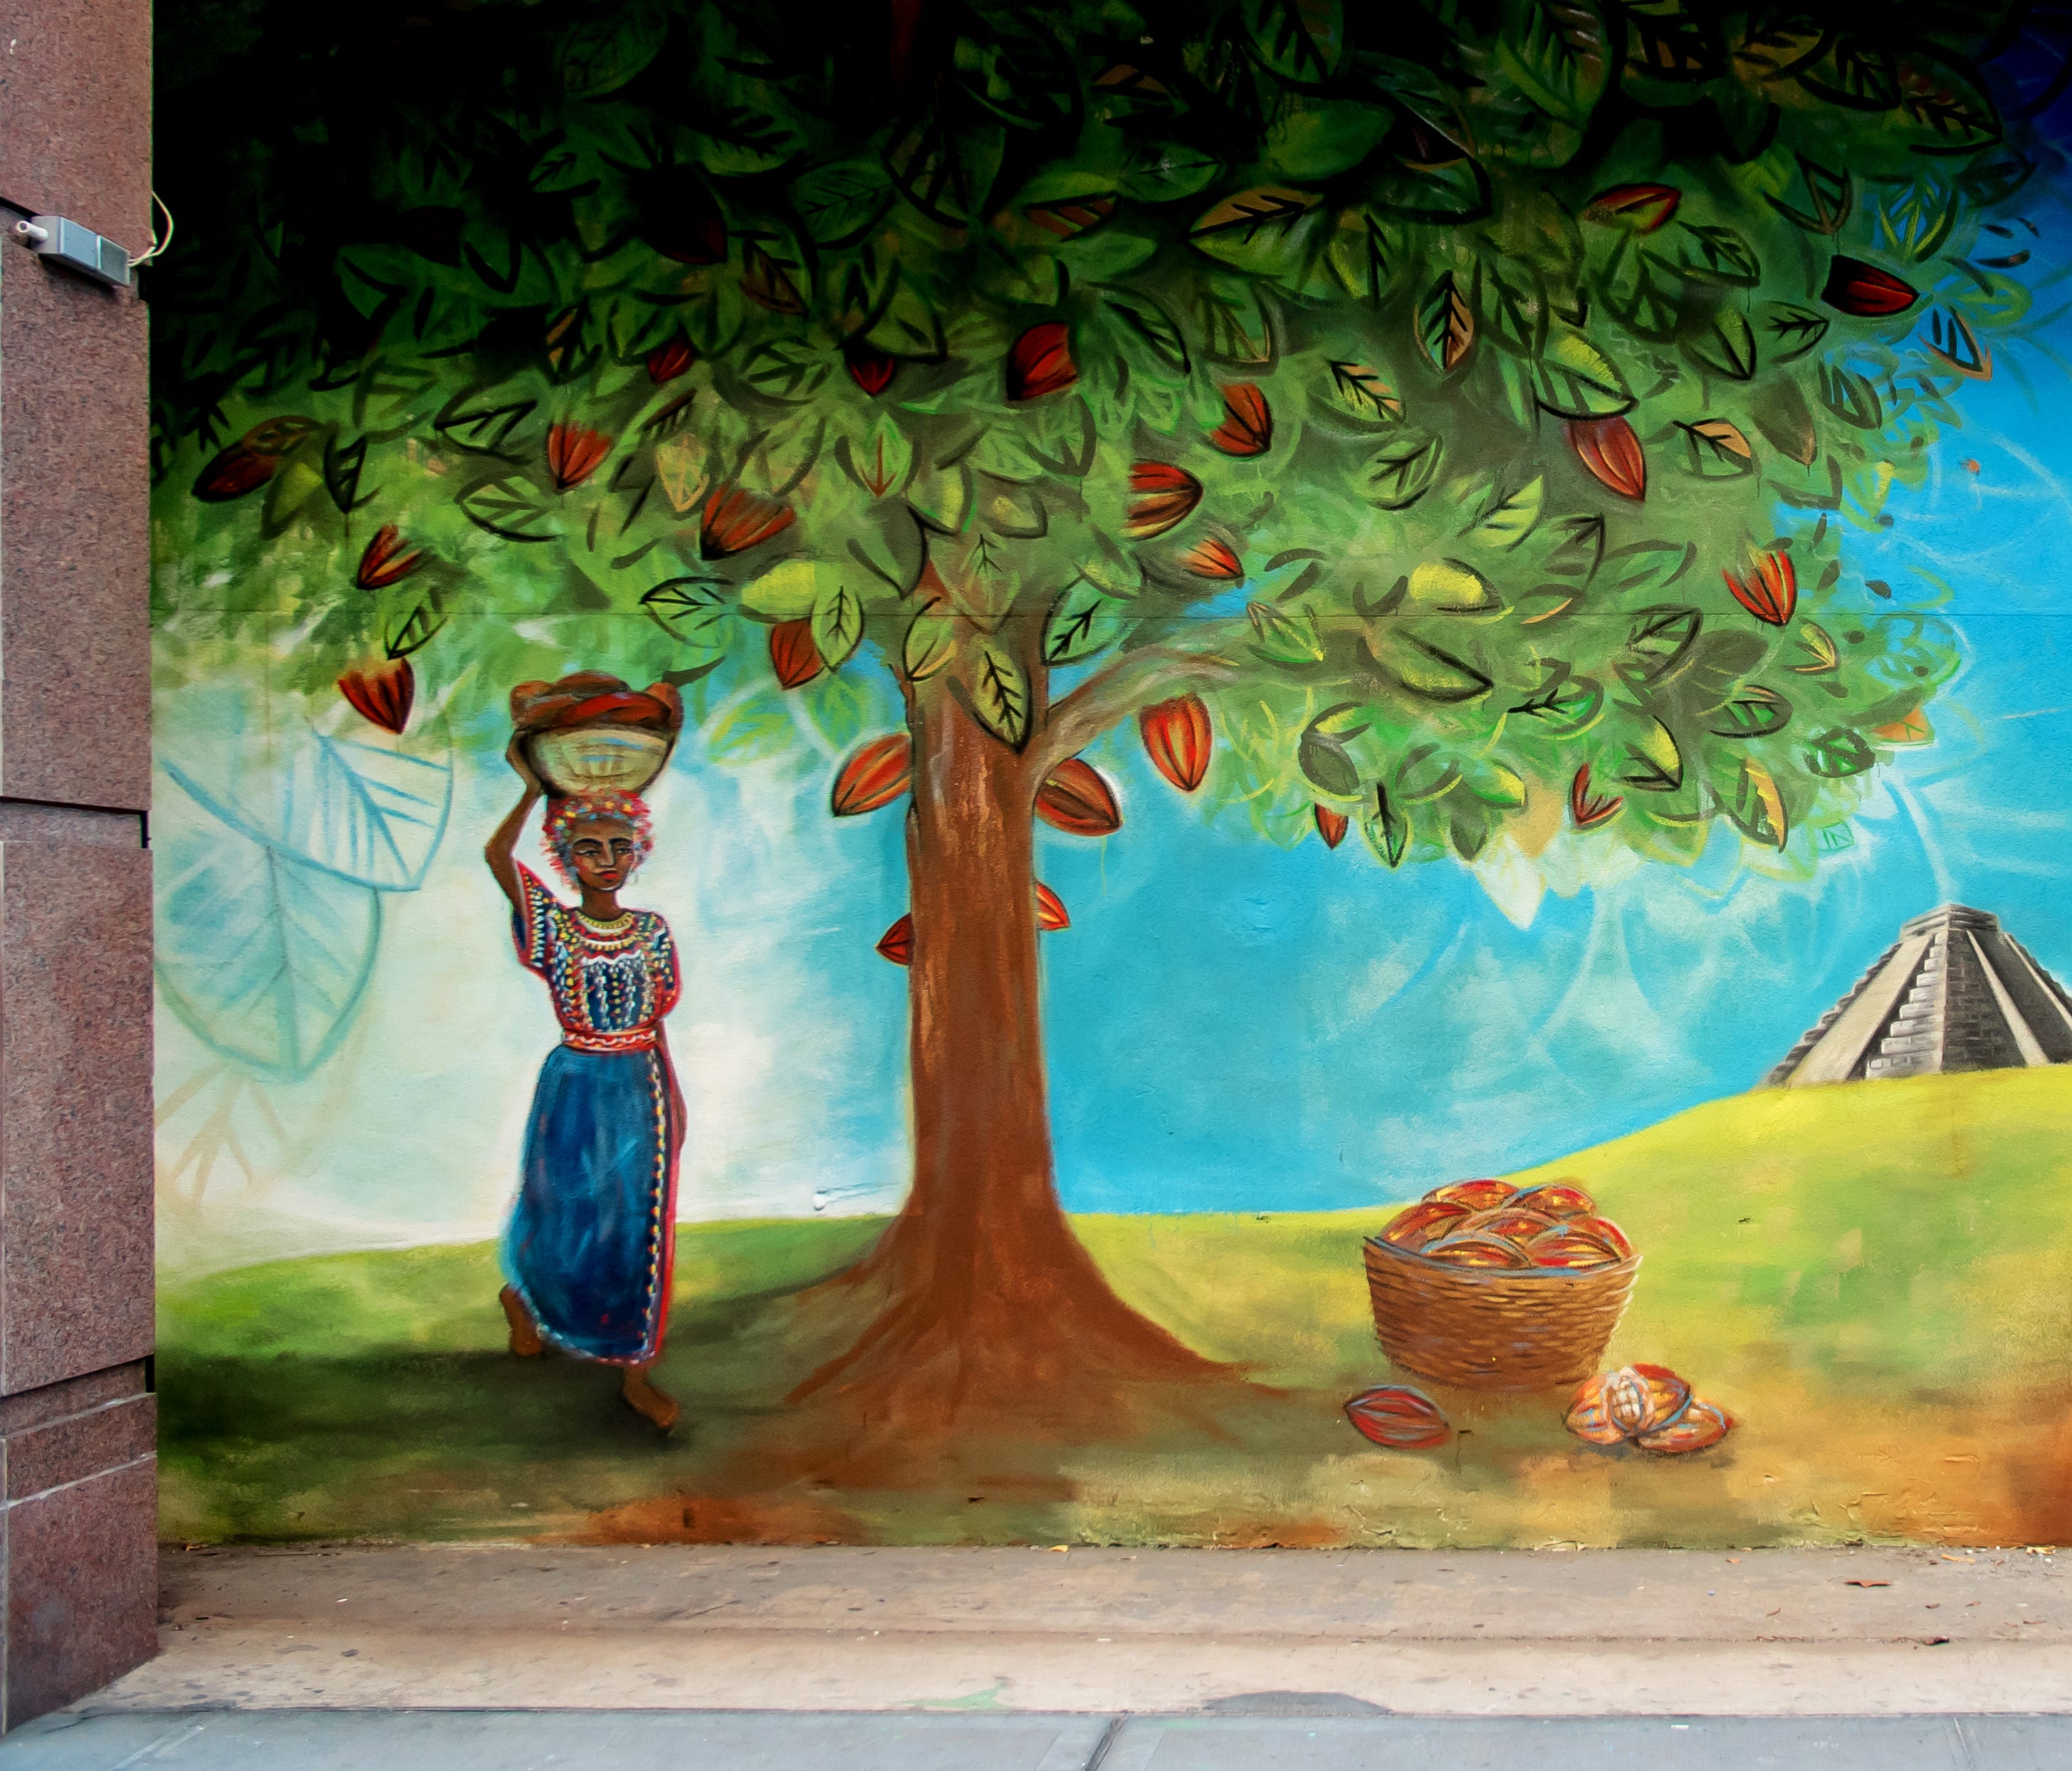 A Brooklyn artist painted a mural inspired by a Yucatan cacao plantation at the entrance of Choco-Story New York.